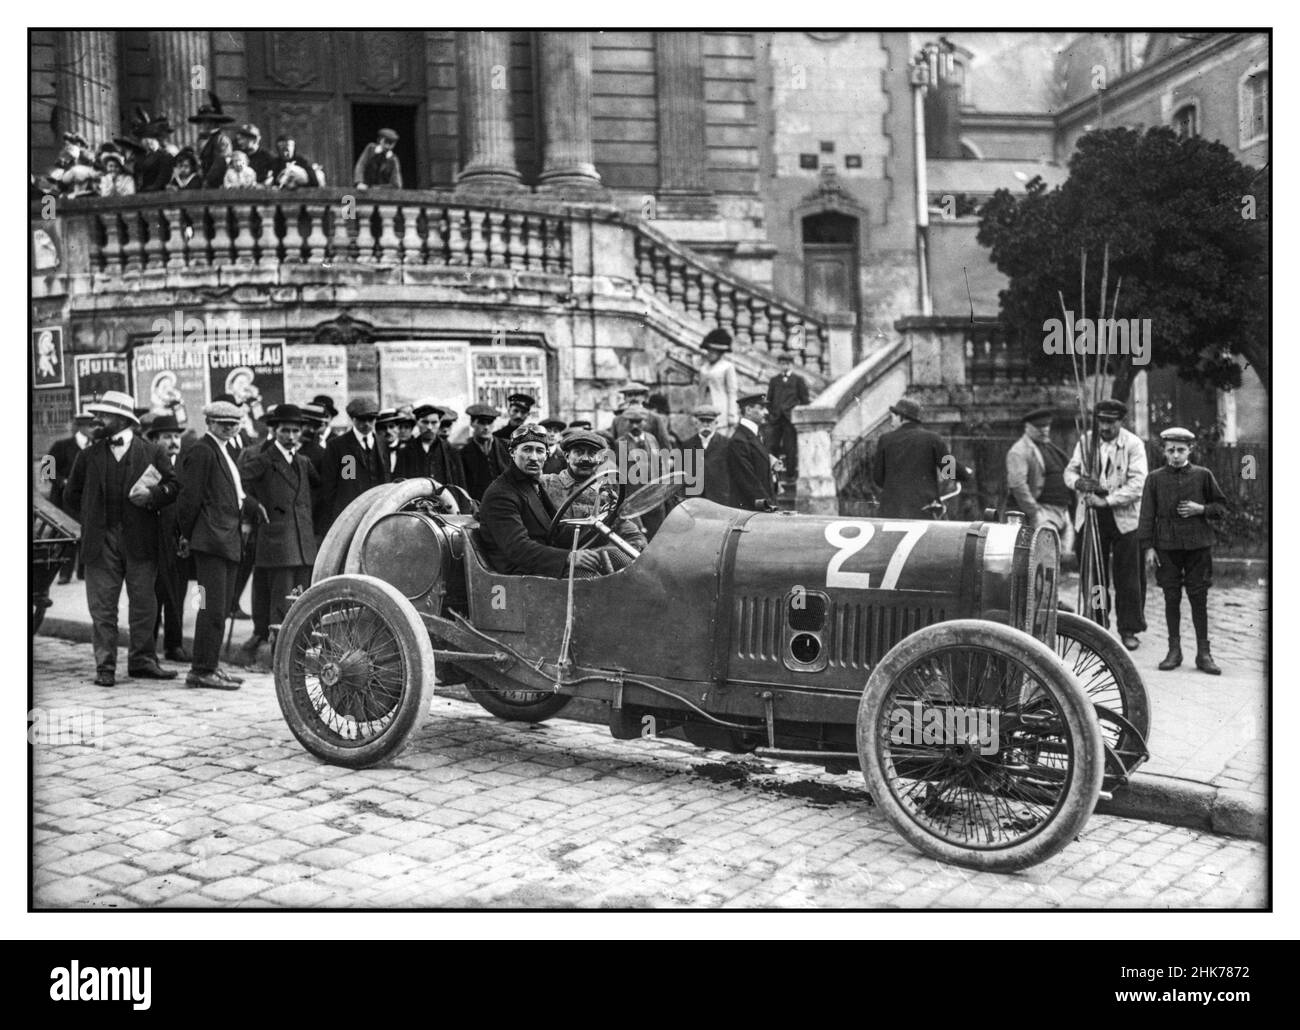 1900s VINTAGE LE MANS 24Hrs PEUGEOT Jules Goux in his Peugeot Number 27 at Le Mans before winning the 1912 Sarthe Cup. Le Mans France Stock Photo